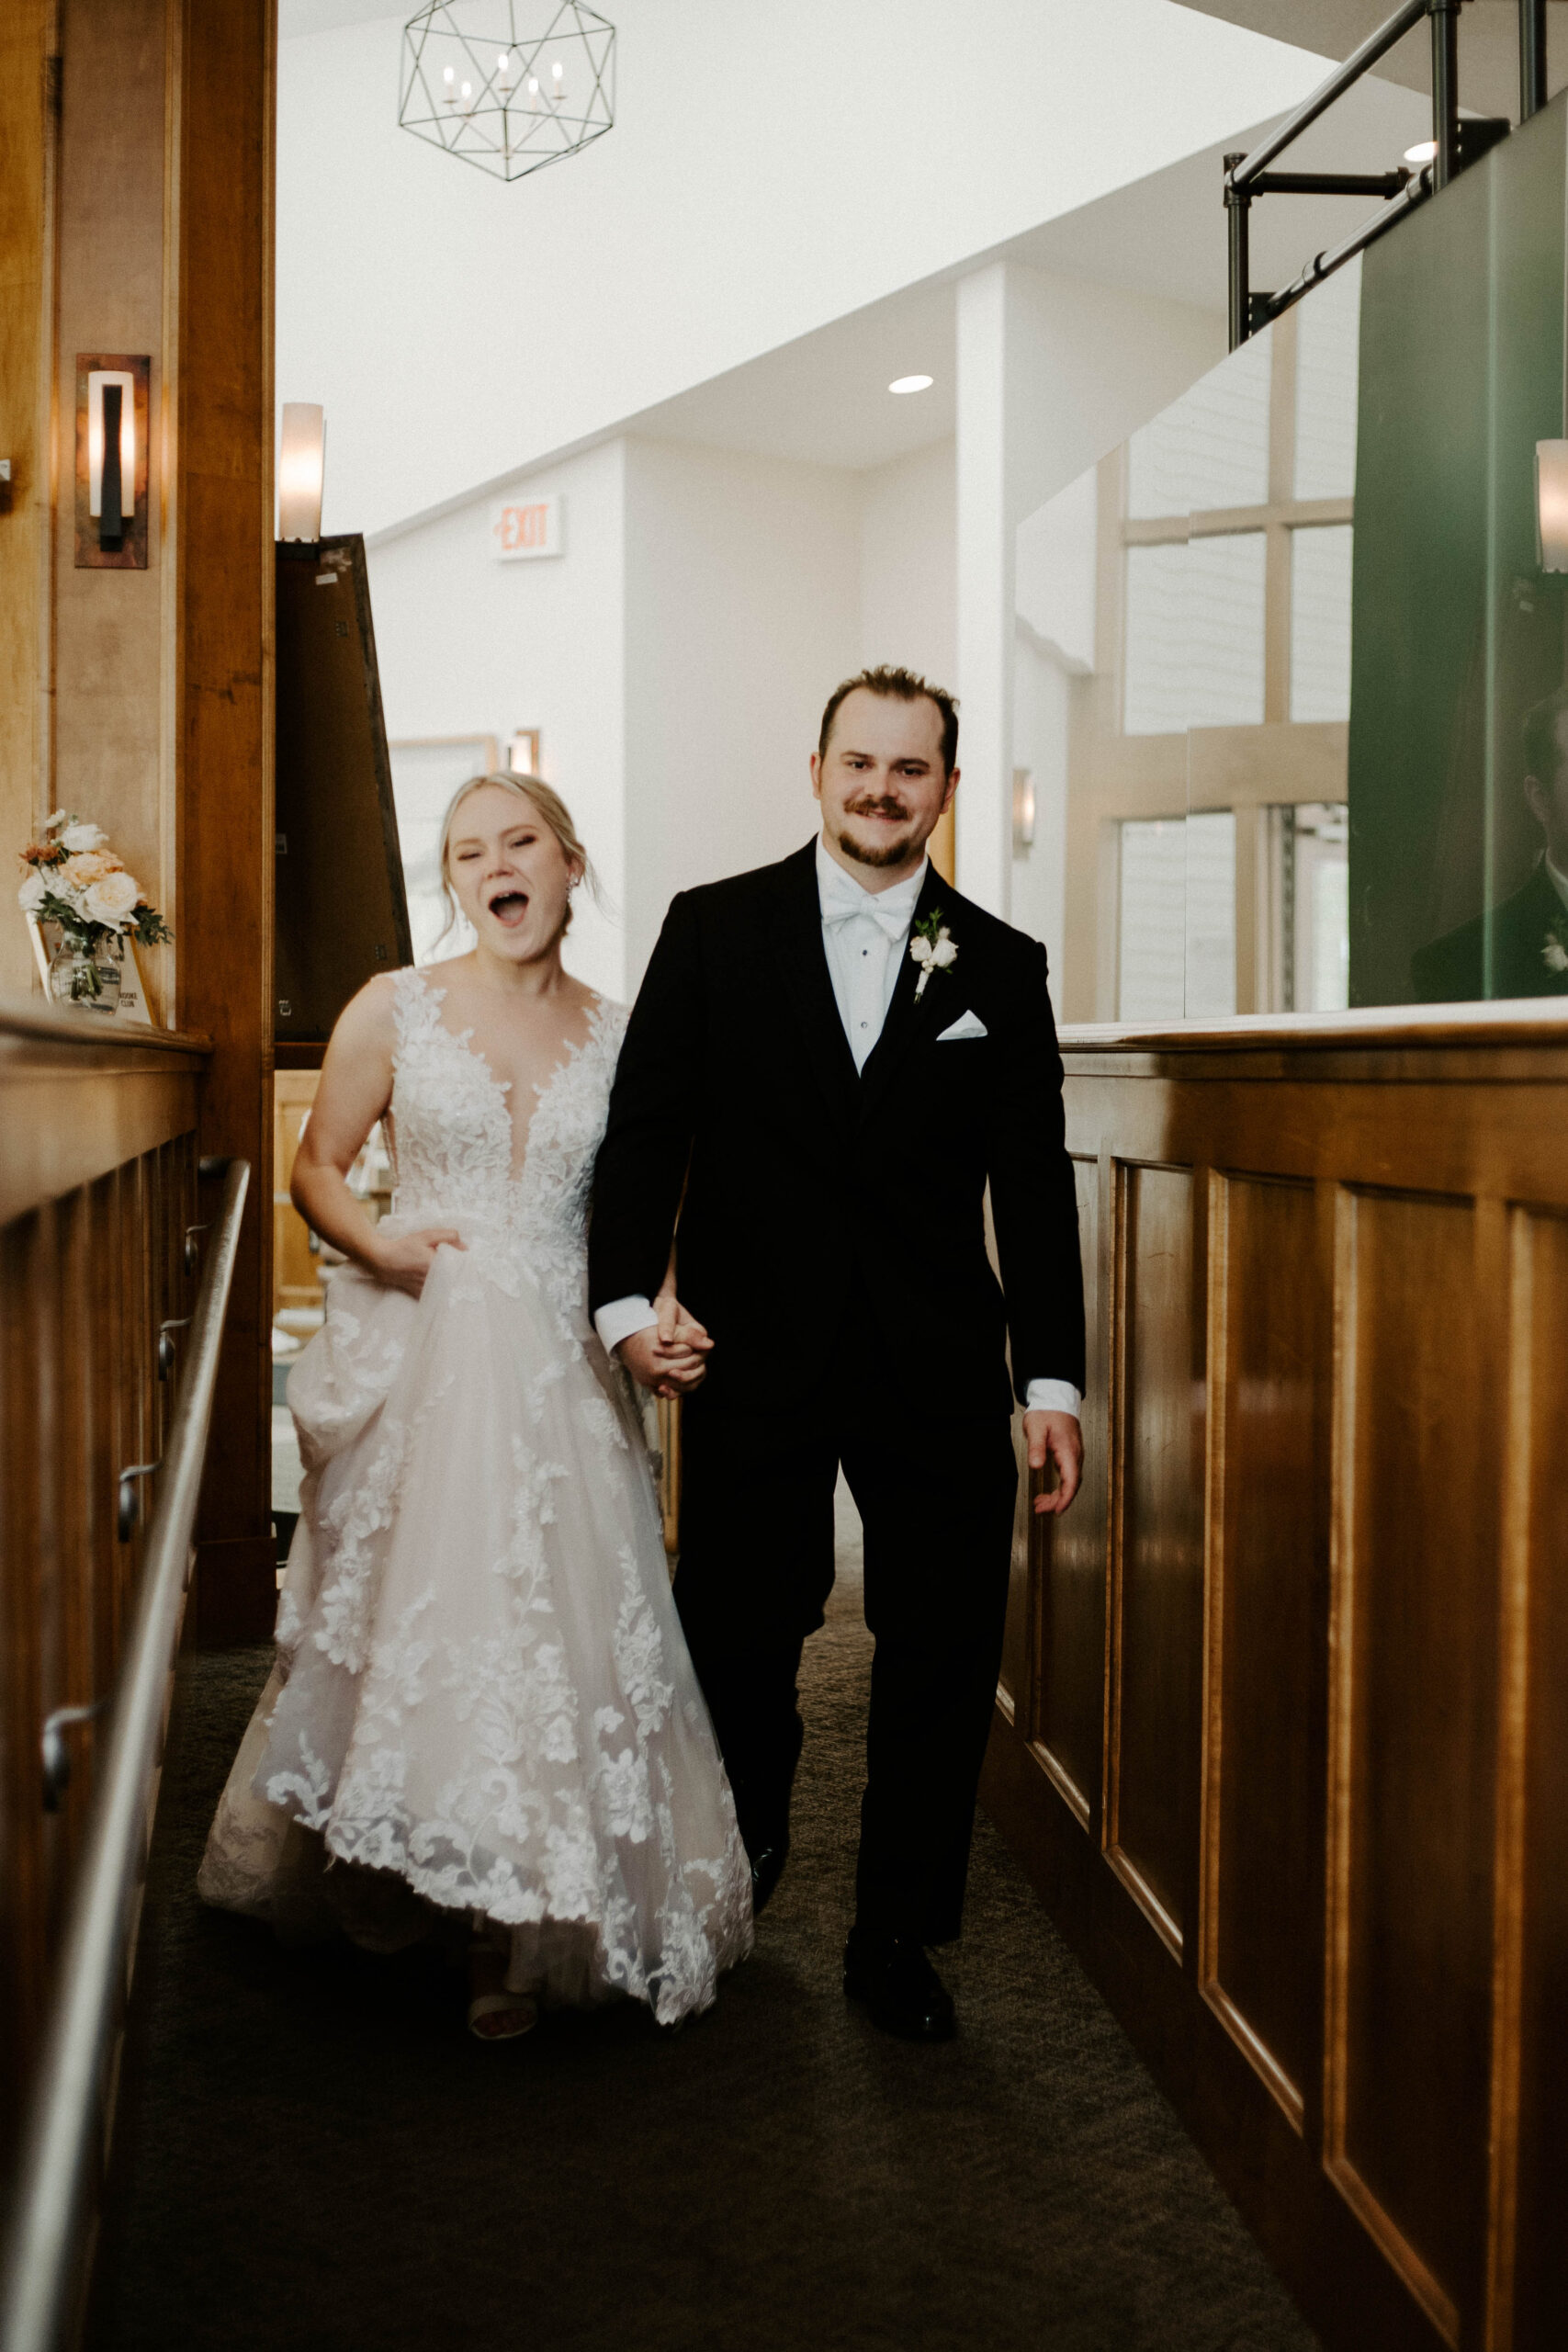 fun bride and groom pictures